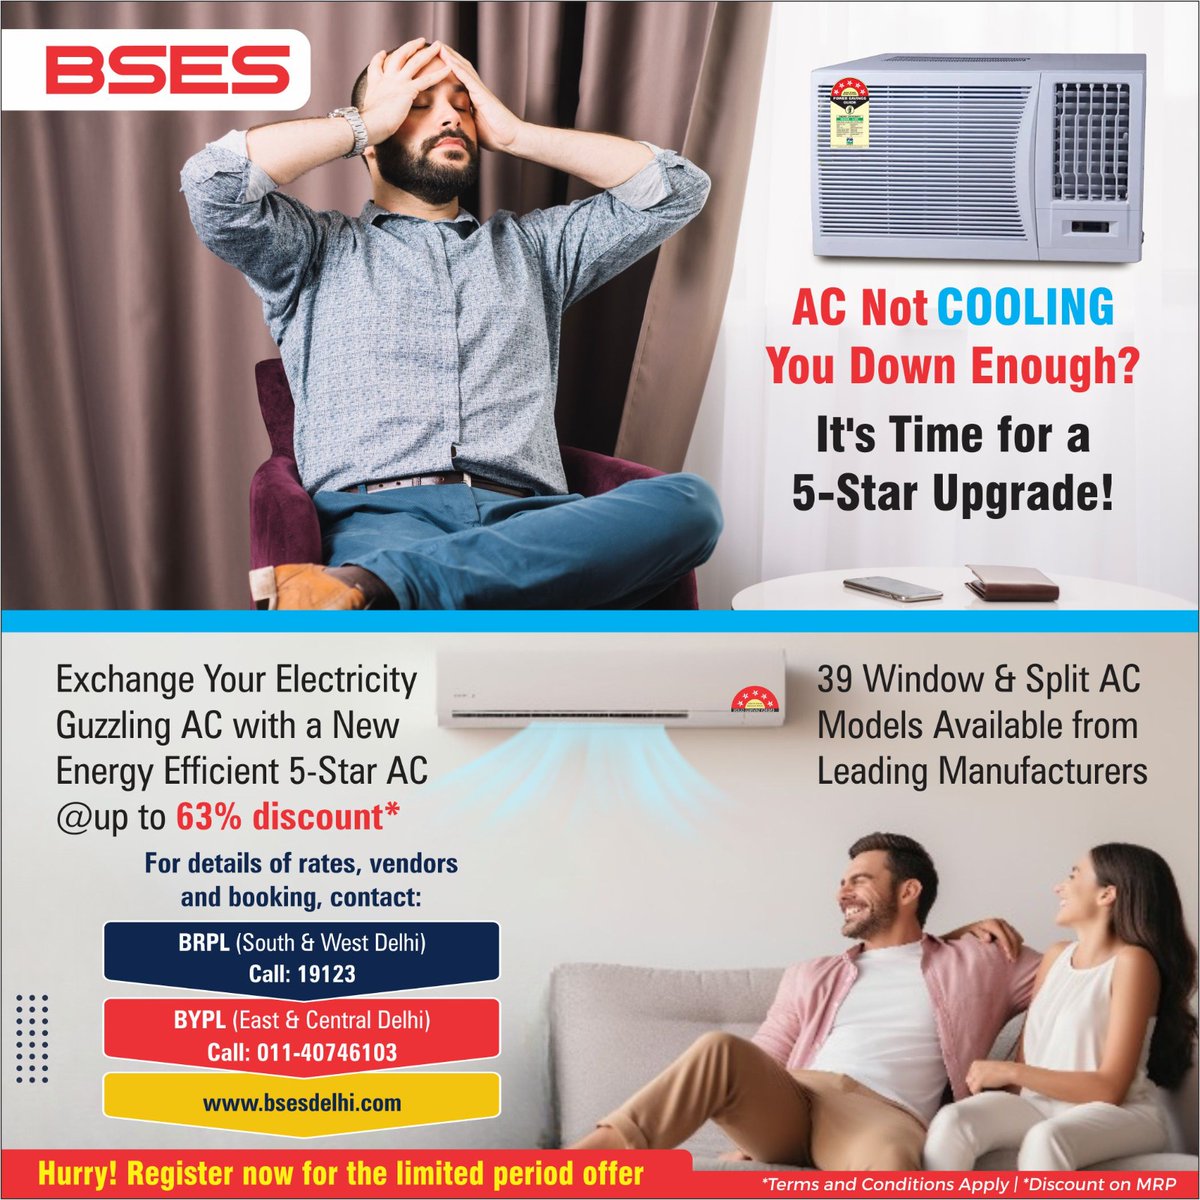 Upgrade your comfort and save the environment! The BSES AC Replacement Scheme offers incredible discounts (up to 63%!) on brand new, energy-saving 5-Star ACs. Choose from a variety of window and split AC models from leading manufacturers. It's a win-win: stay cool and contribute